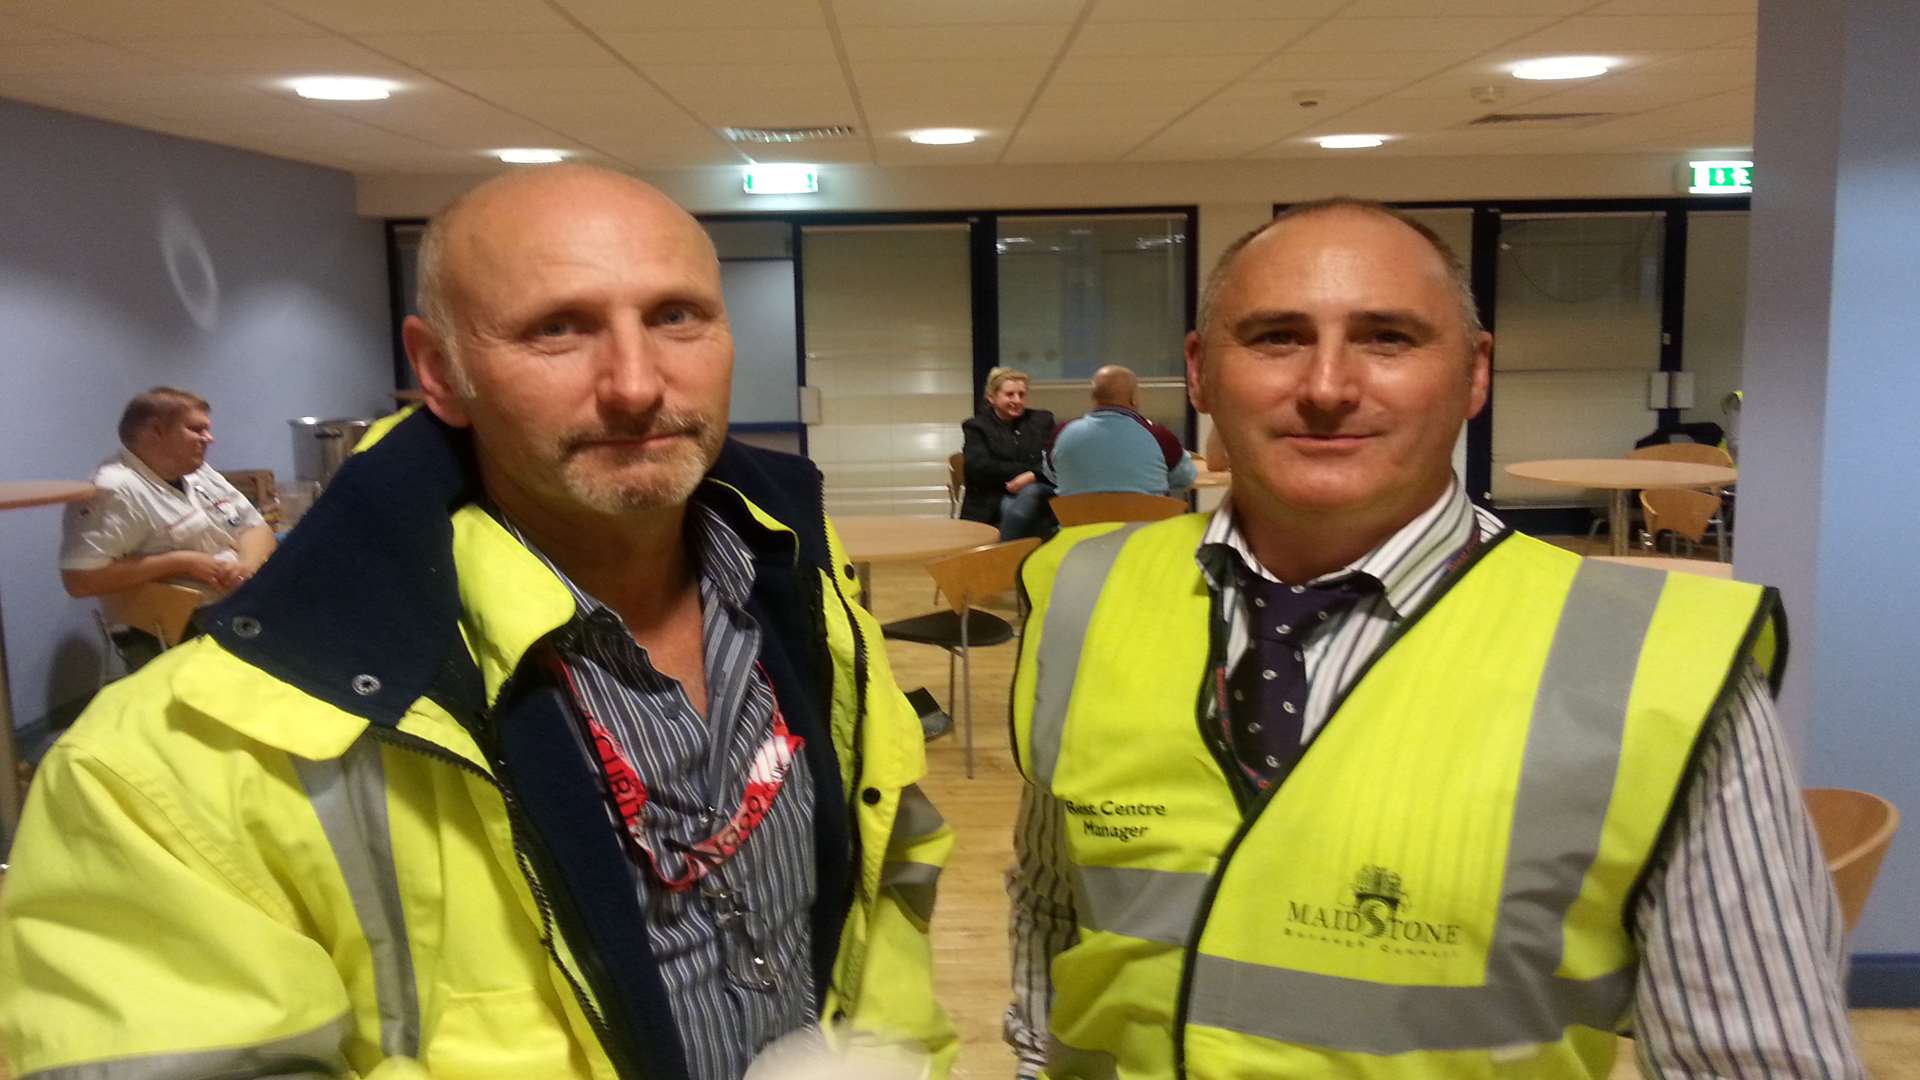 Steve Scully of the Kent Resilience Team and David Harrison of Maidstone Council who co-ordinated the evacuation